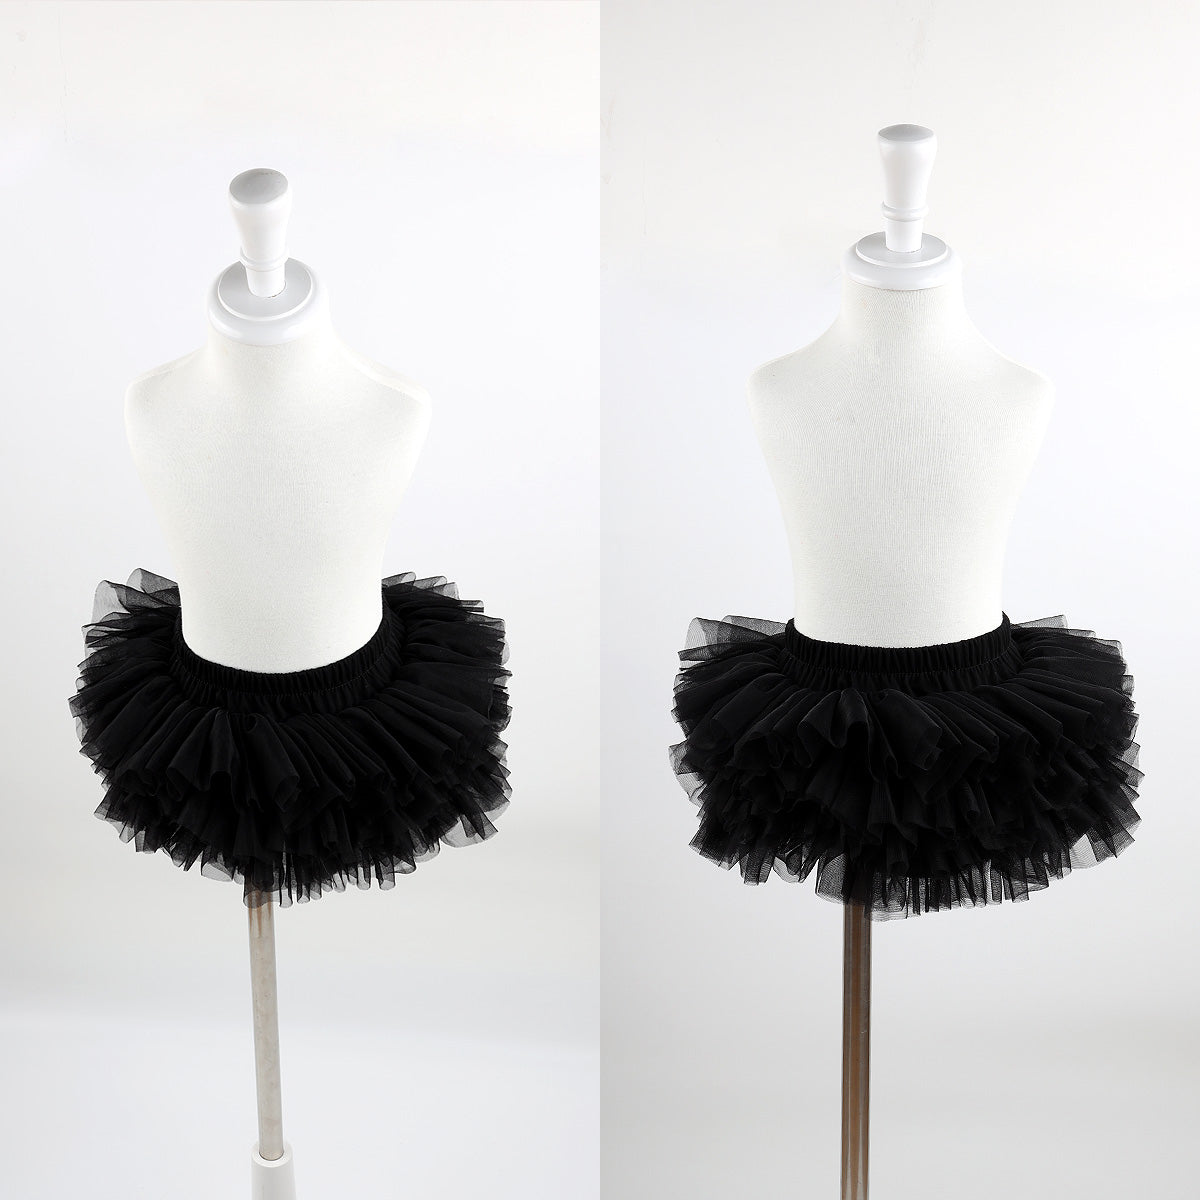 Baby Girls Super Soft Fluffy Black Tutu Skirt and Headband Set with Diaper Cover